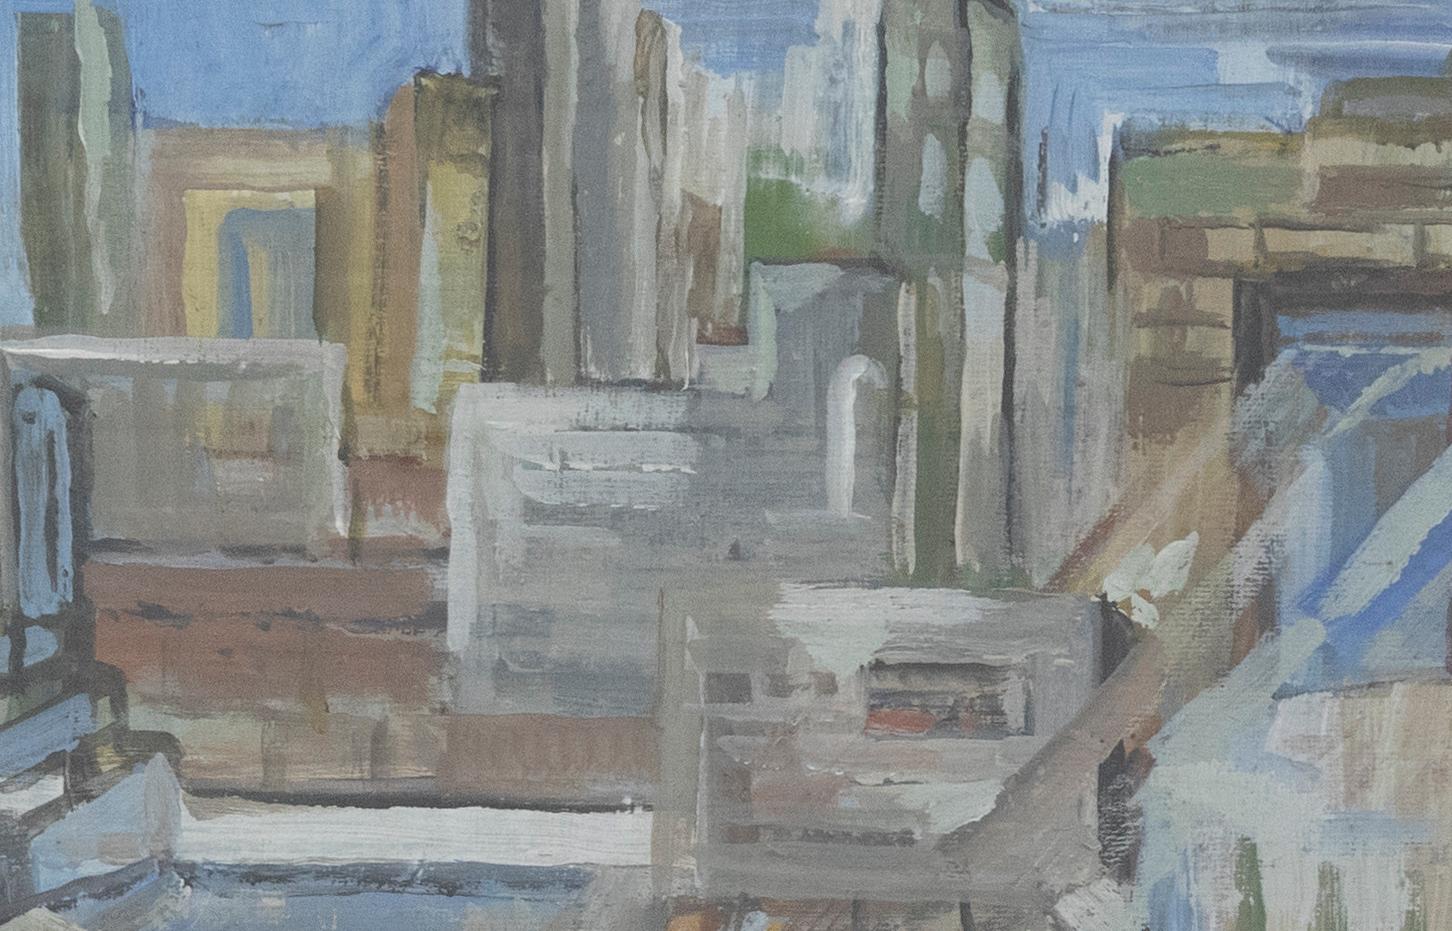 Framed Contemporary Oil - City Skyscrapers - Painting by Unknown